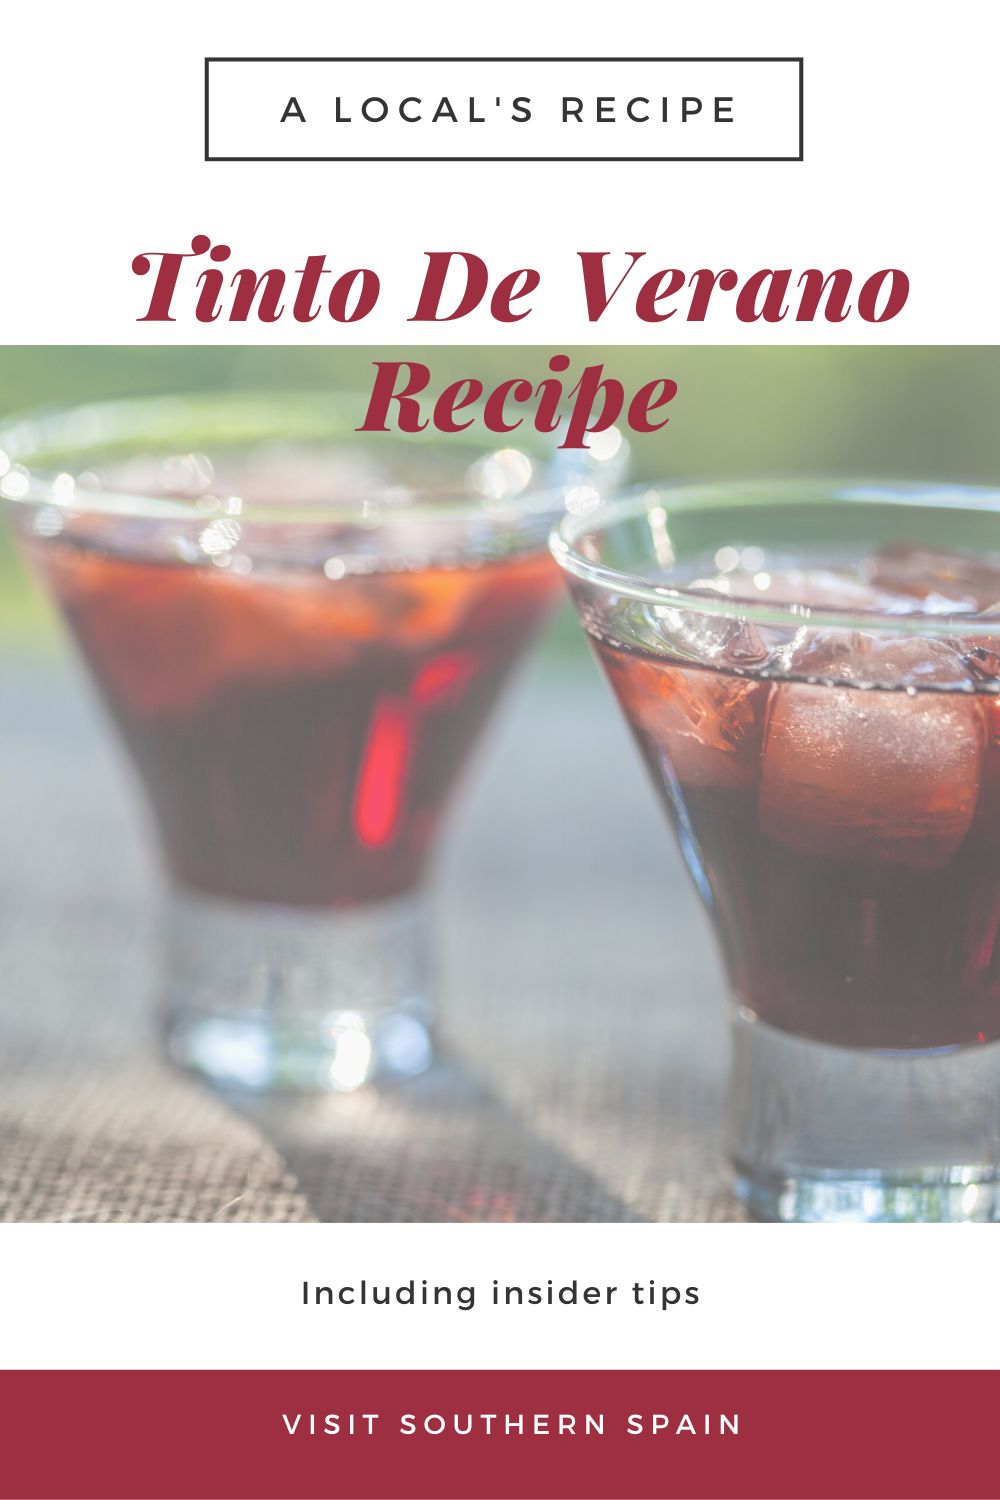 Are you looking for an Easy Tinto De Verano Recipe? Learn how to make Tinto de Verano and fight the heat away with this simple and delicious Spanish summer wine. You don't need much to do the Tinto de Verano recipe and with only two ingredients and some ice, you will have one of the best summer mixed drinks to sip by the pool. The sweet wine combines so perfectly with the sparkling lemon soda and you discover soon this is your favourite drink. #tintodeverano #summerwine #spanishwine #sweetwine